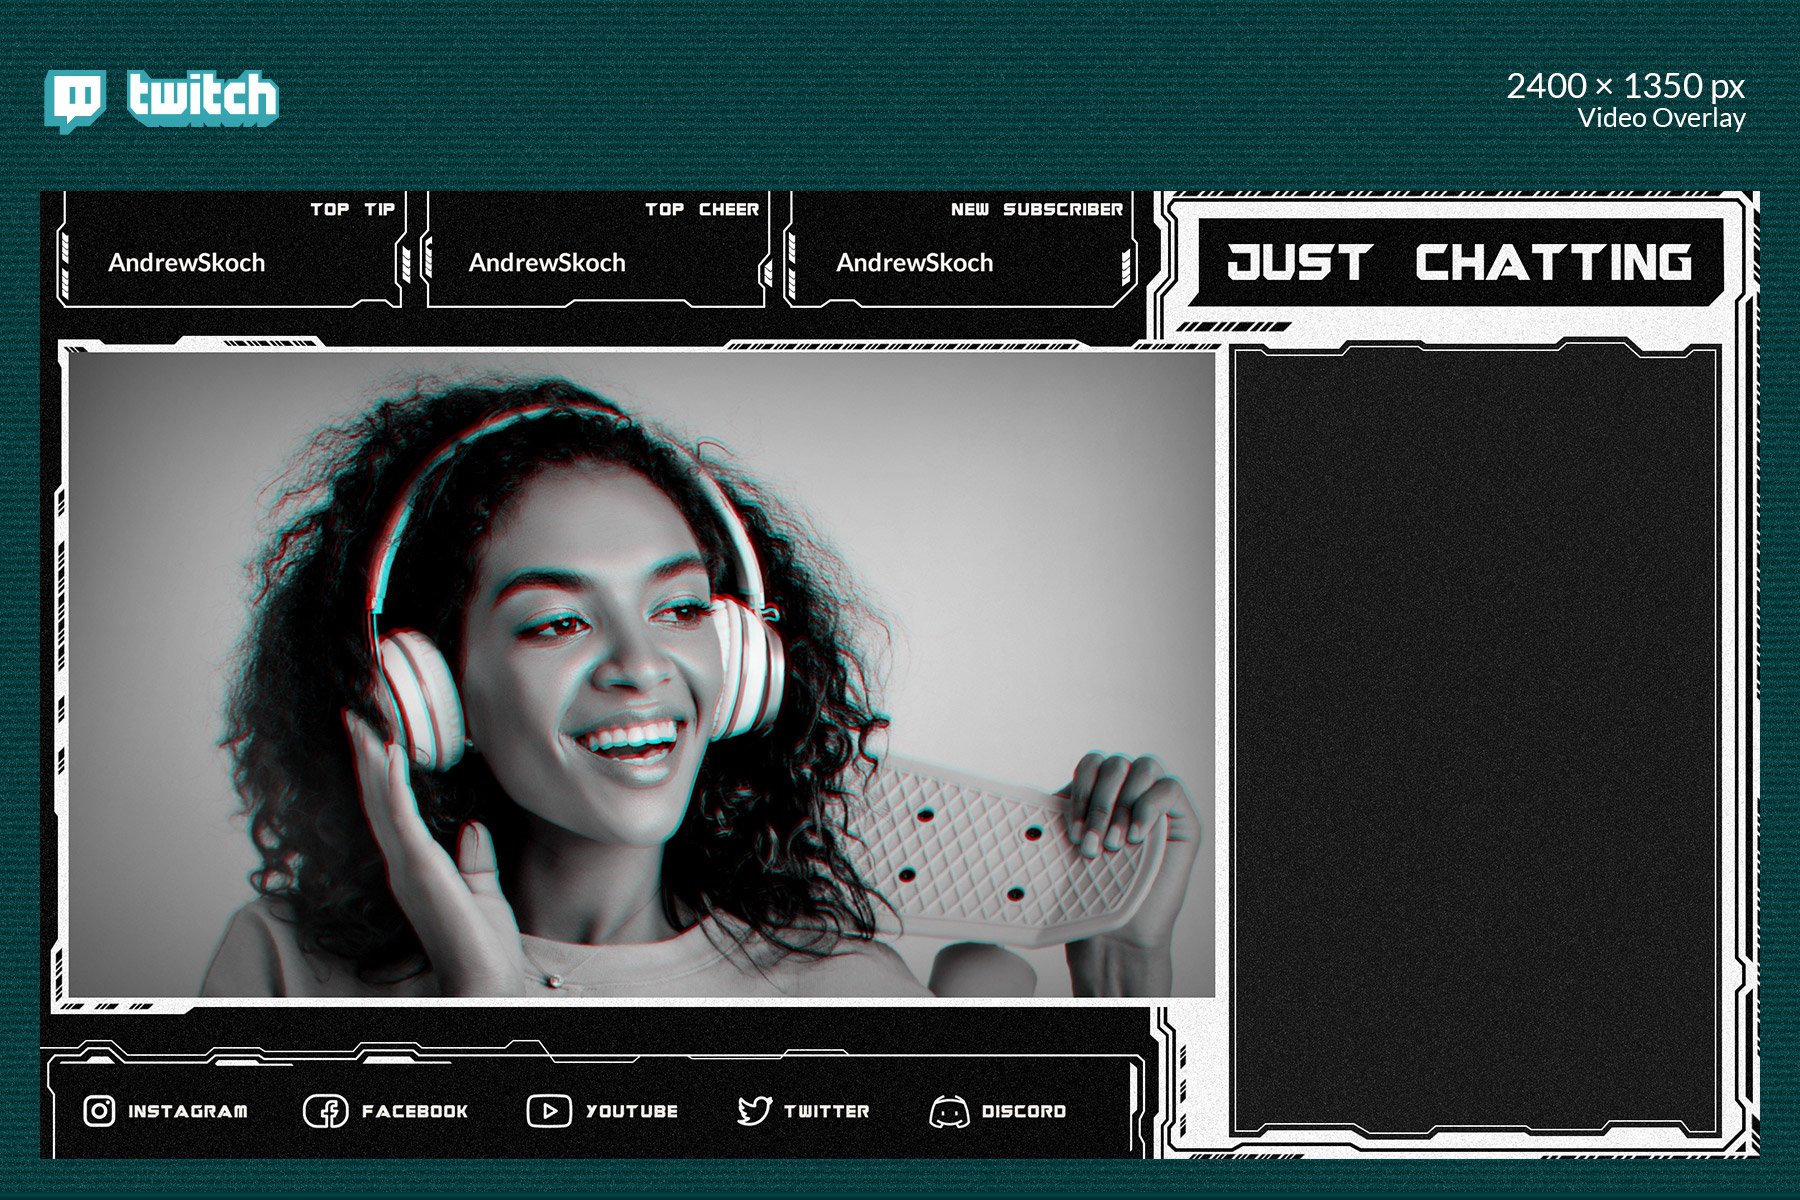 Glitch Twitch – Just Chatting, Graphic Templates - Envato Elements